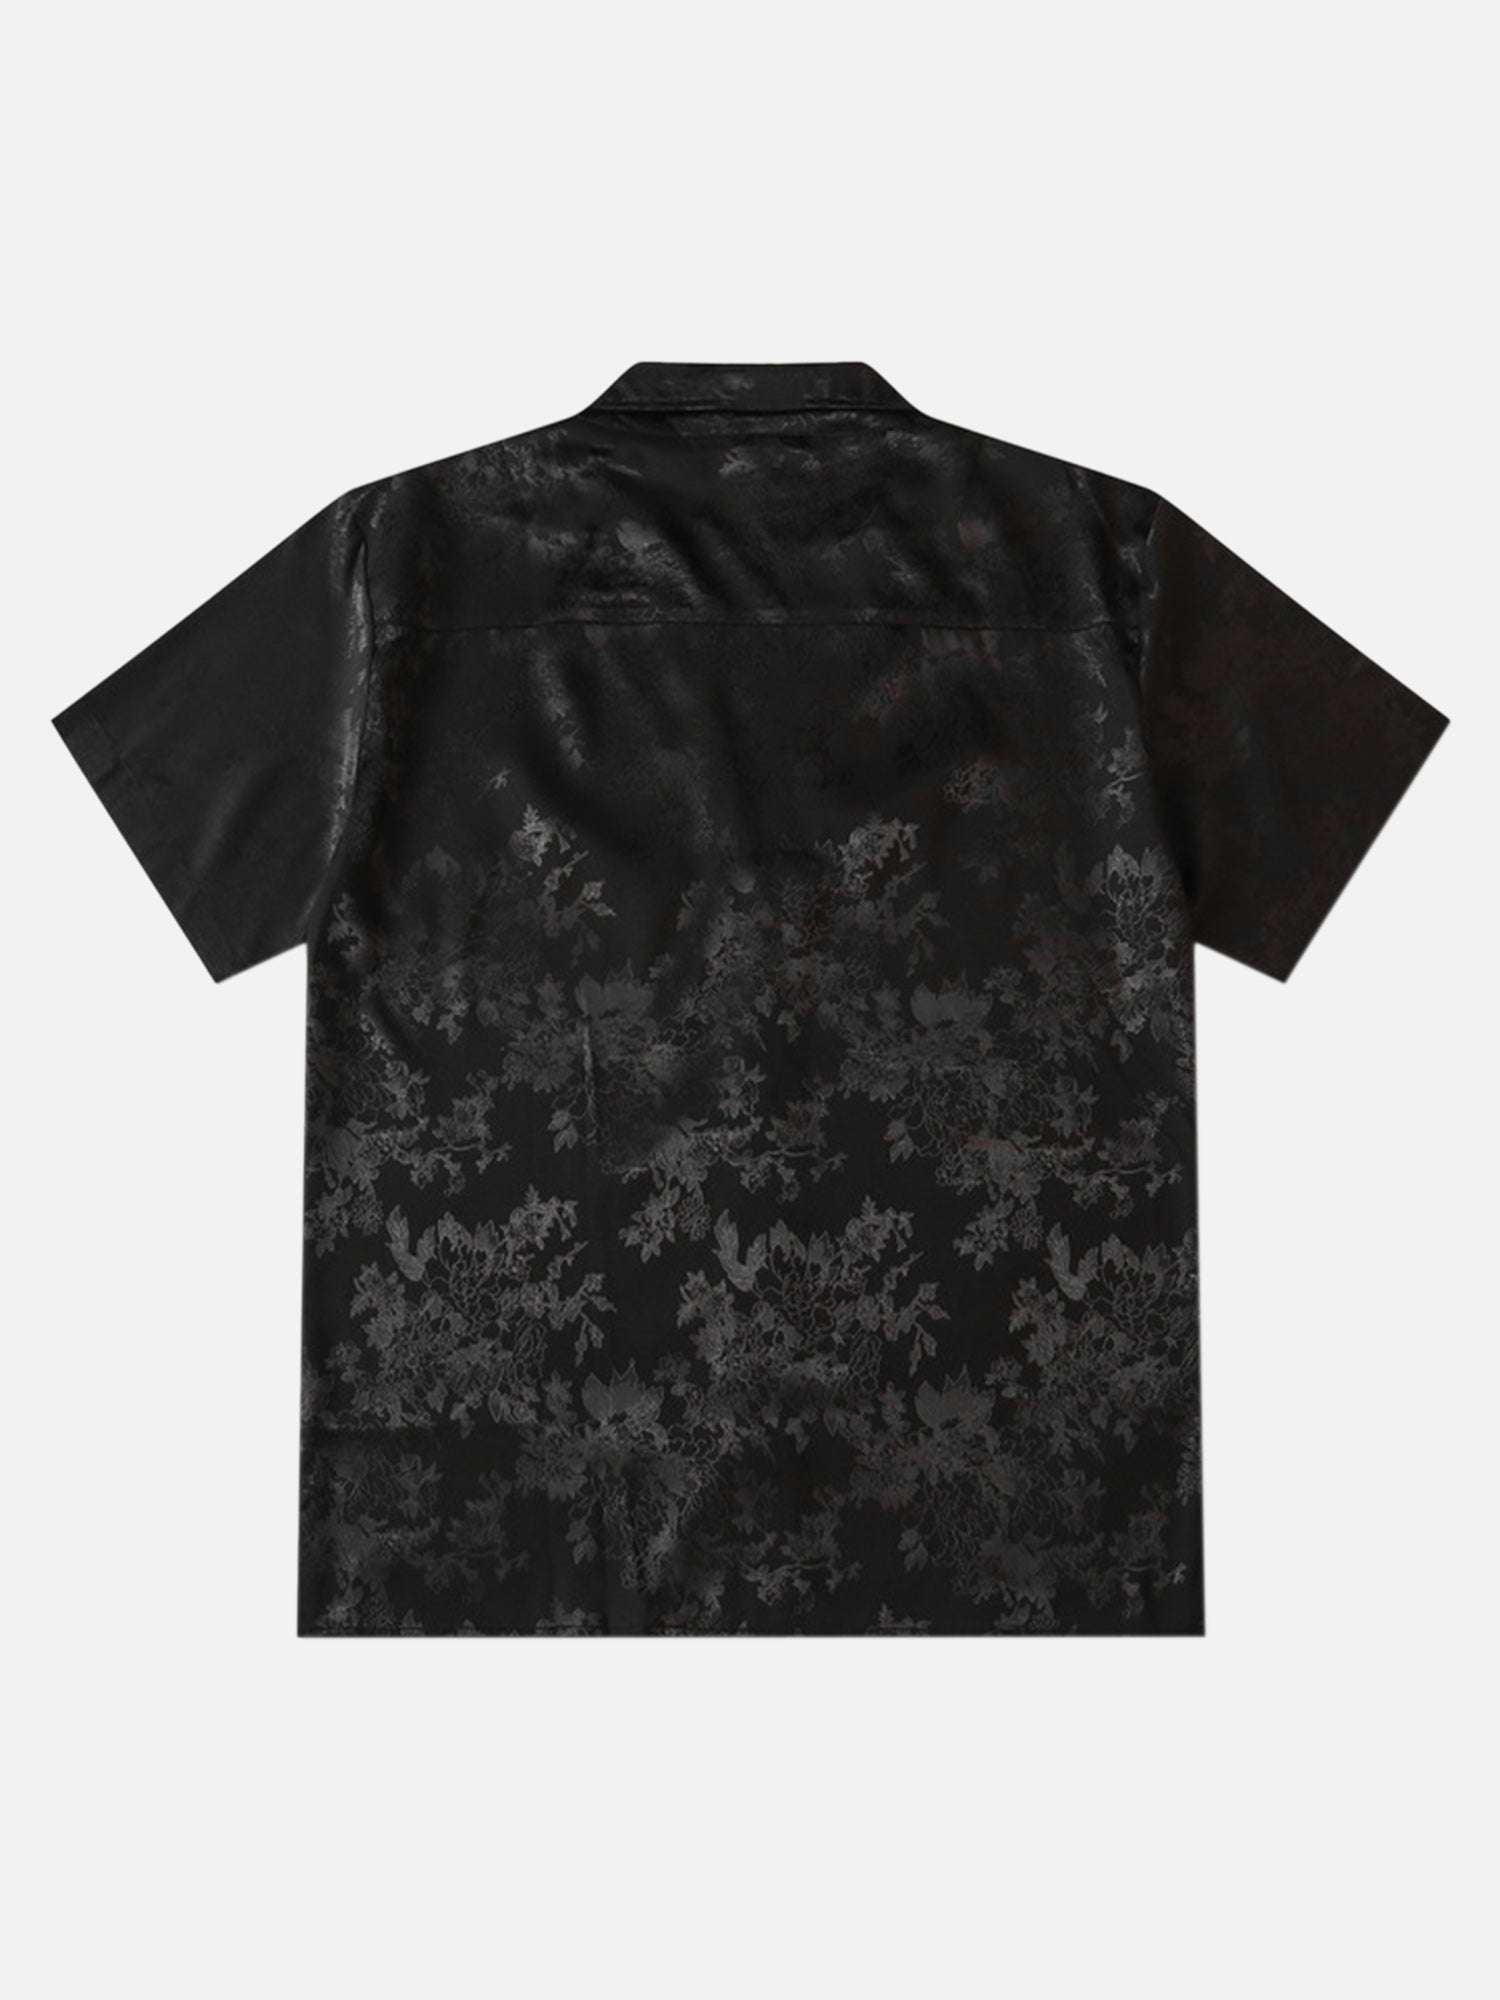 Thesupermade Personalized Street Hip-hop Black Pattern Shirts